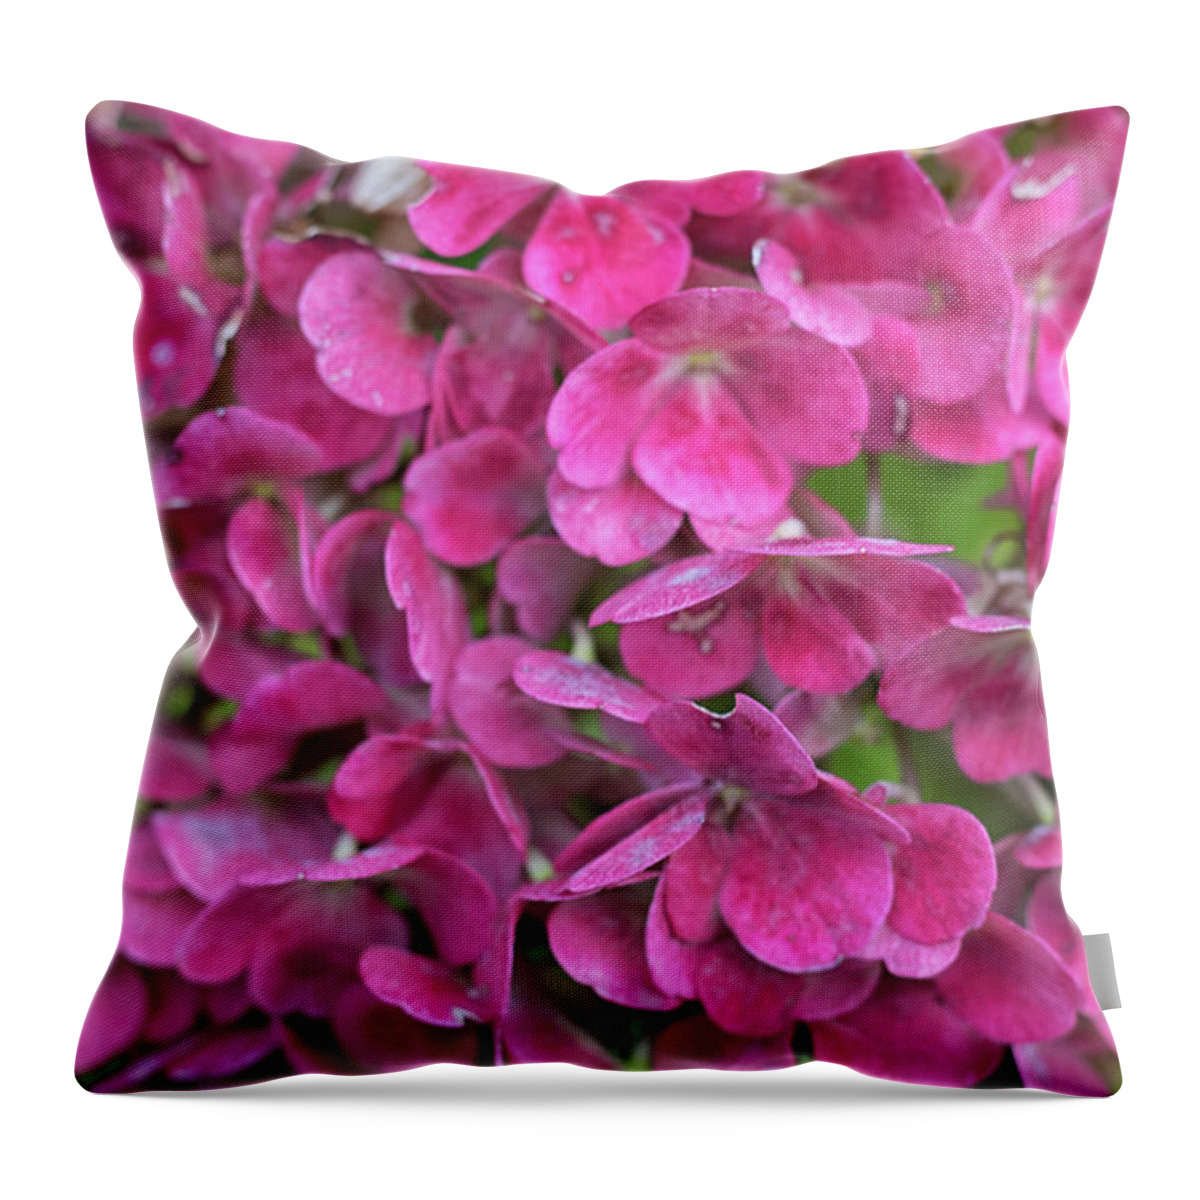 Plant Throw Pillow featuring the photograph Petals by Martin Newman